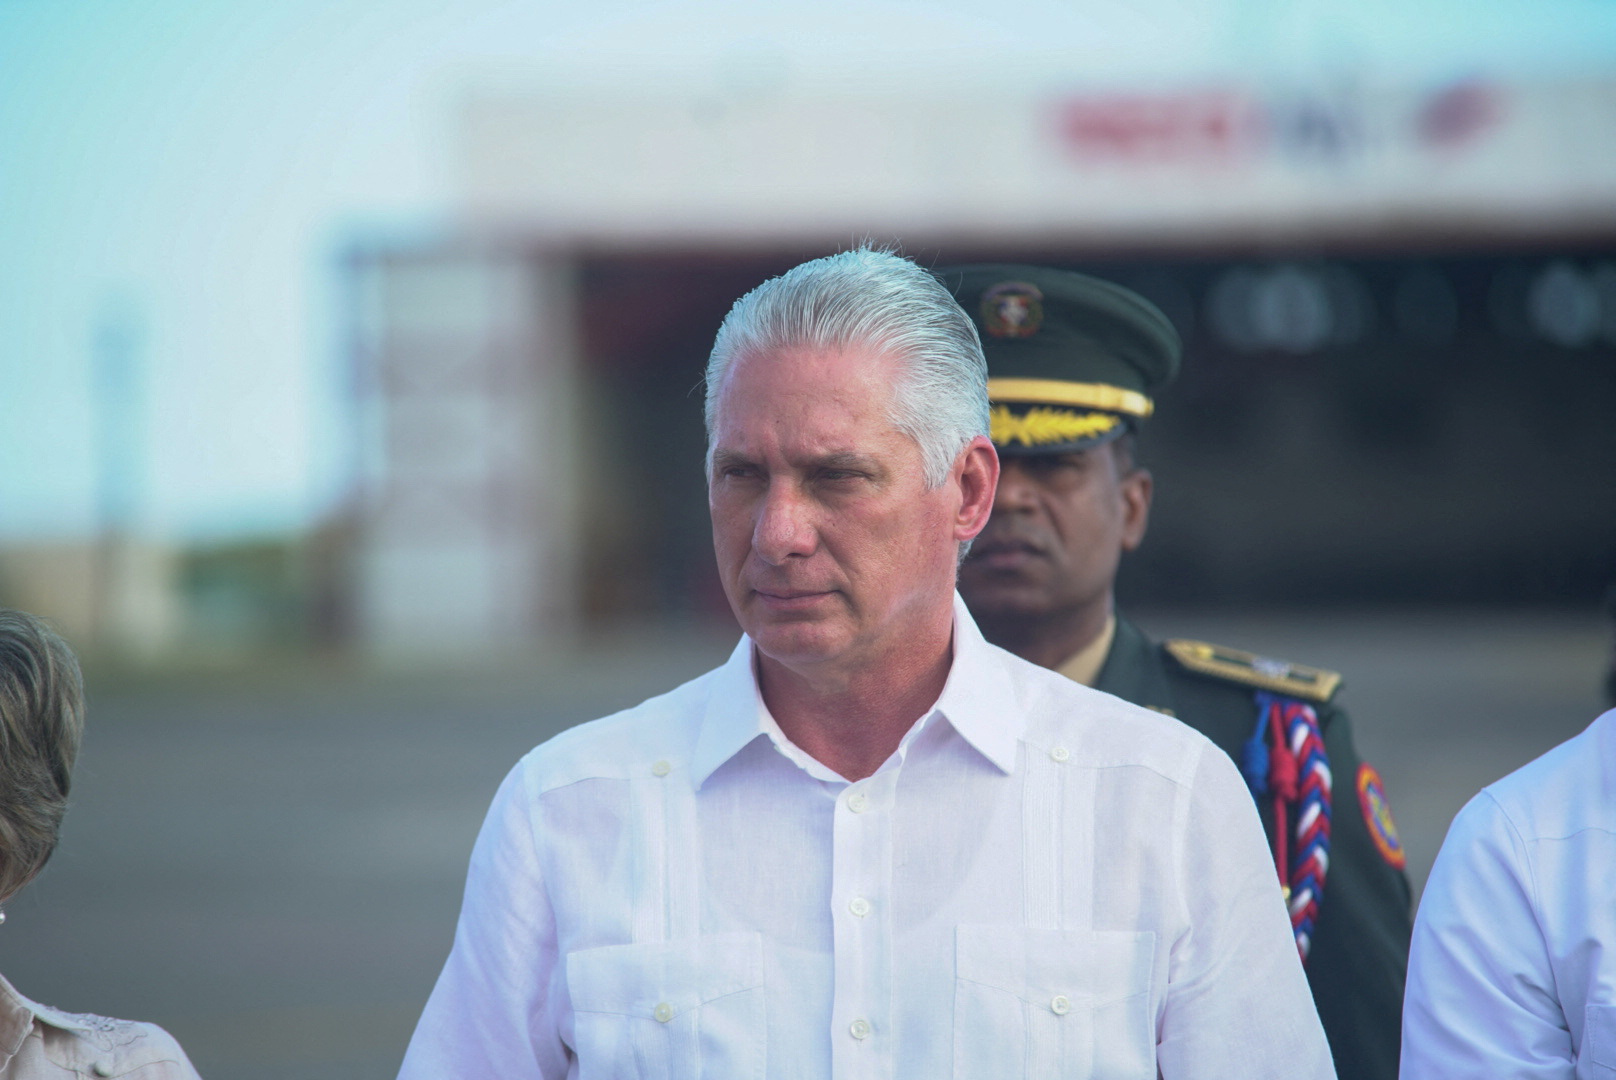 Cuban President Miguel Diaz-Canel arrives for the XXVIII Ibero - American Summit of Heads of State and Government, in Santo Domingo, Dominican Republic, March 24, 2023. Dominican Republic Ministry of Foreign Affairs/Handout via REUTERS THIS IMAGE HAS BEEN SUPPLIED BY A THIRD PARTY. NO RESALES. NO ARCHIVES